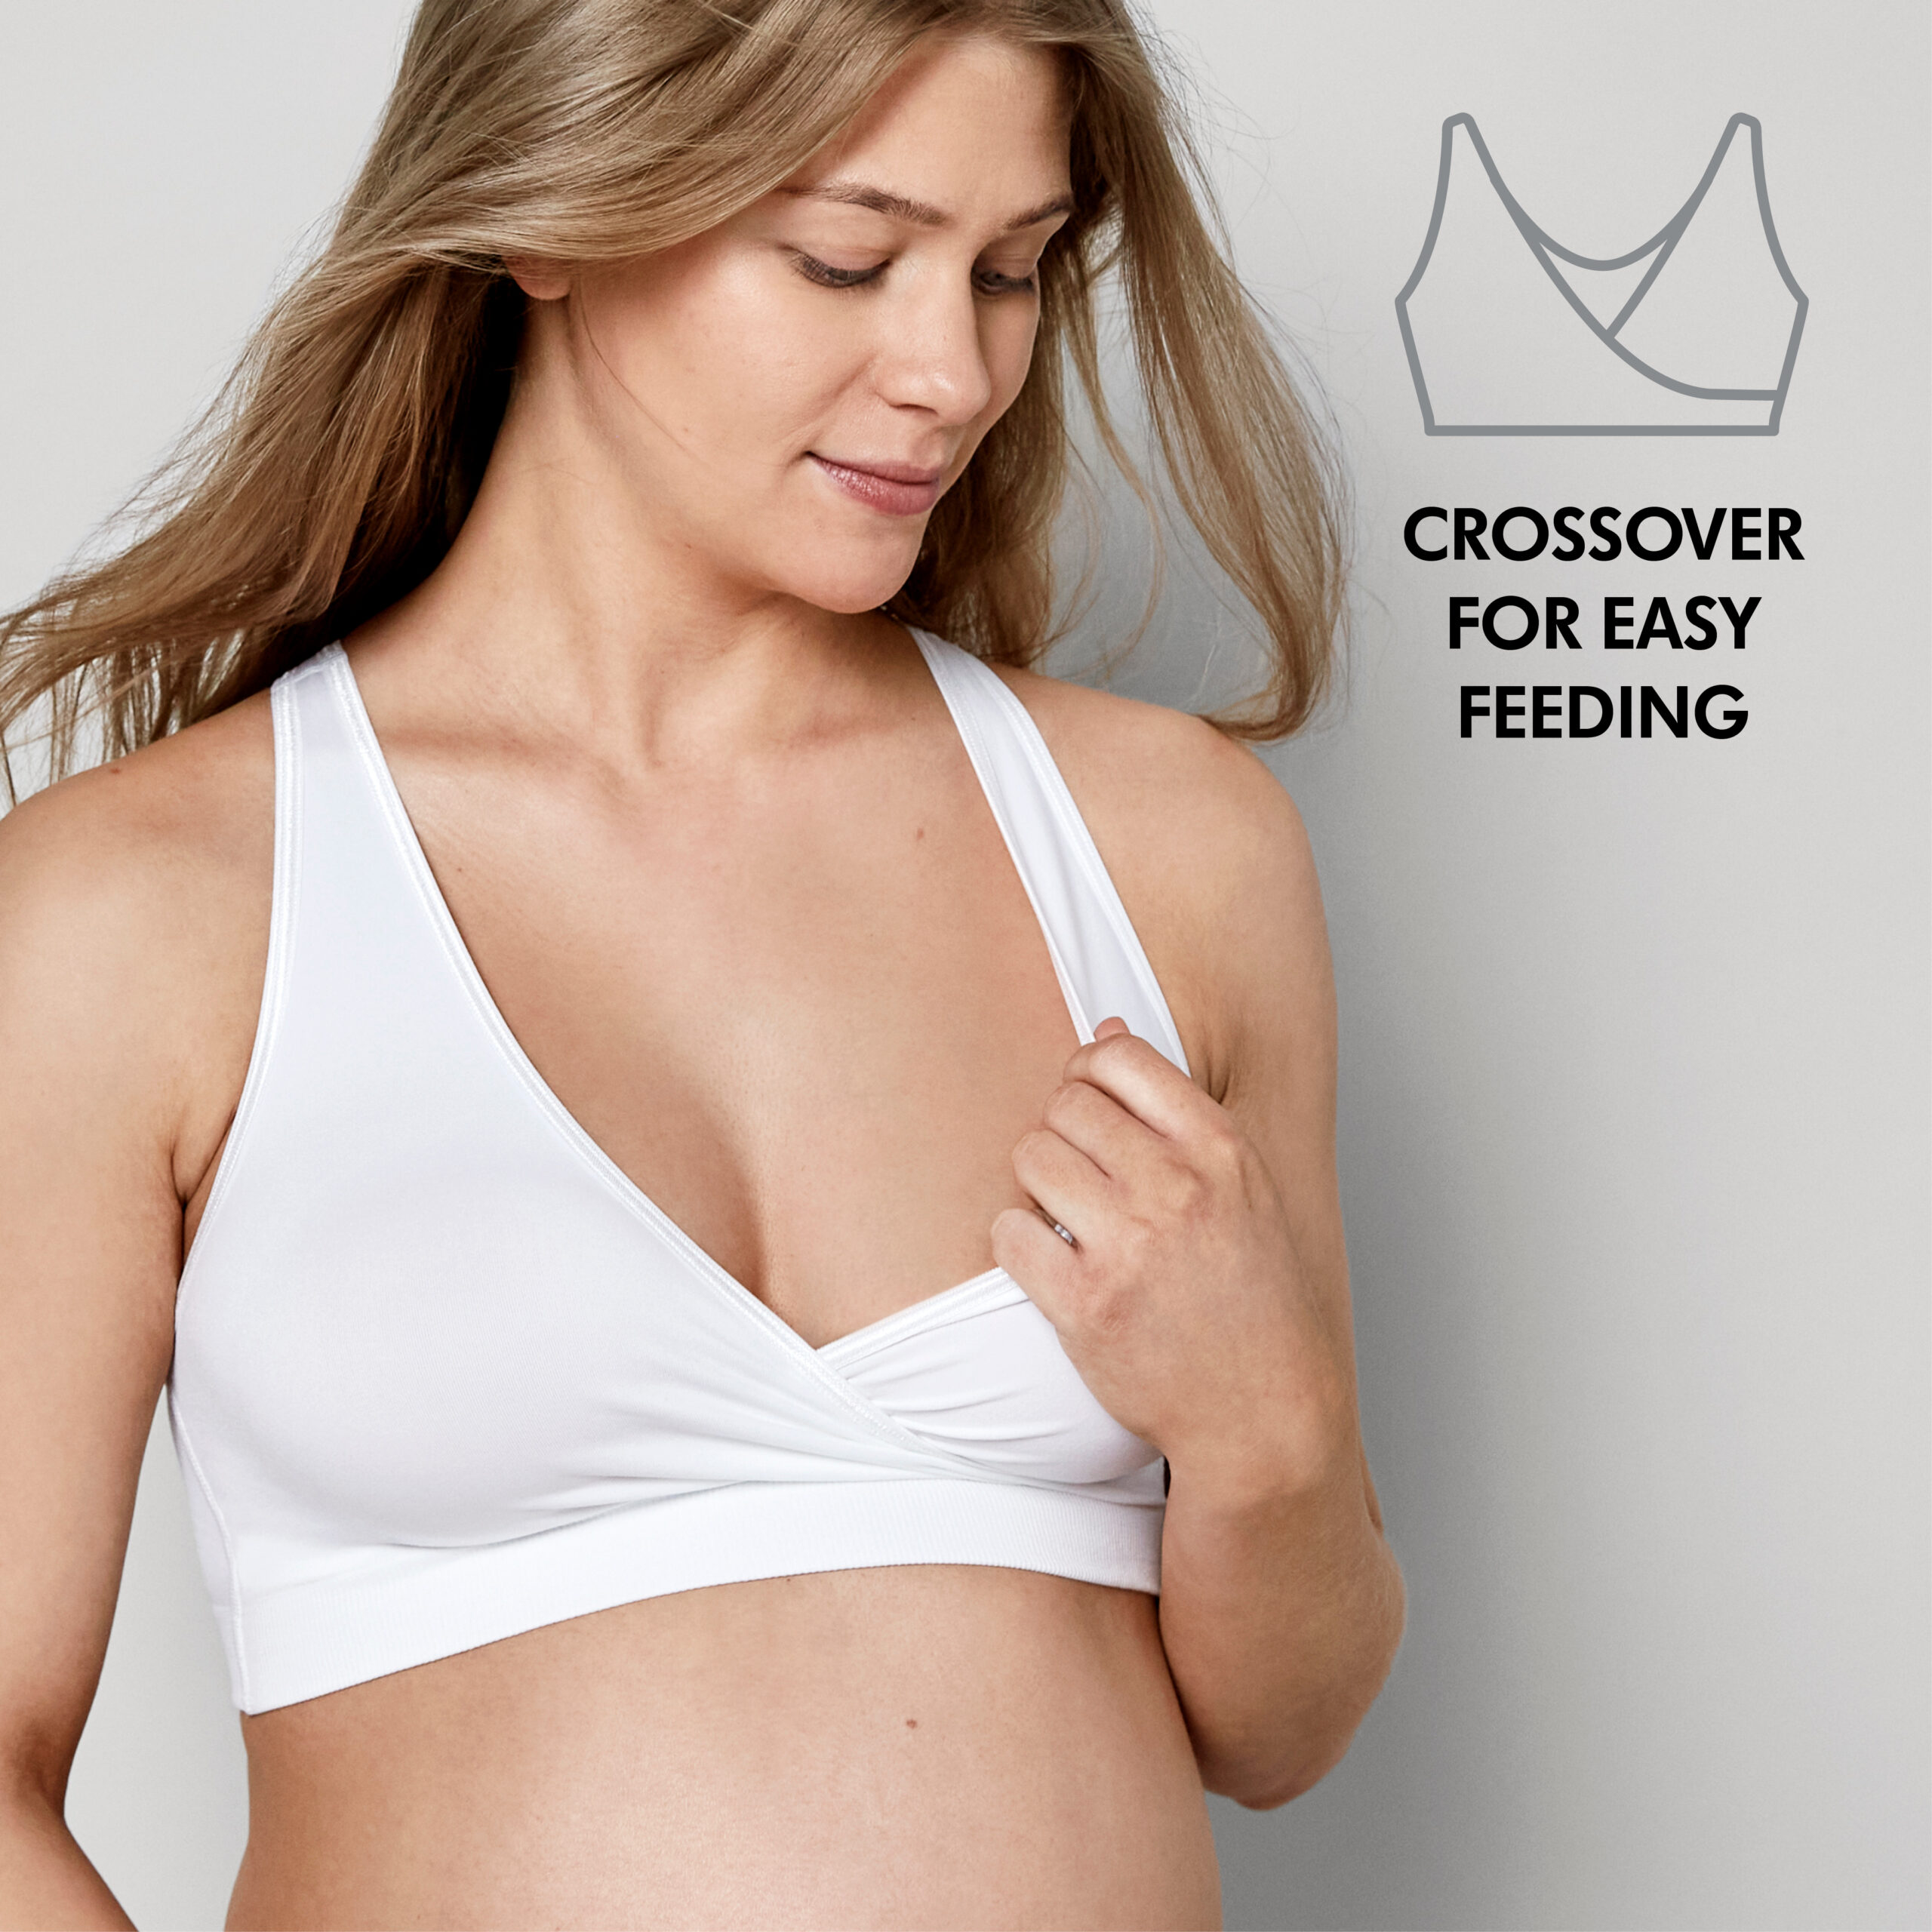 Want to Become Pregnant Breast Feeding Bra Size 40/90 Gray NIP